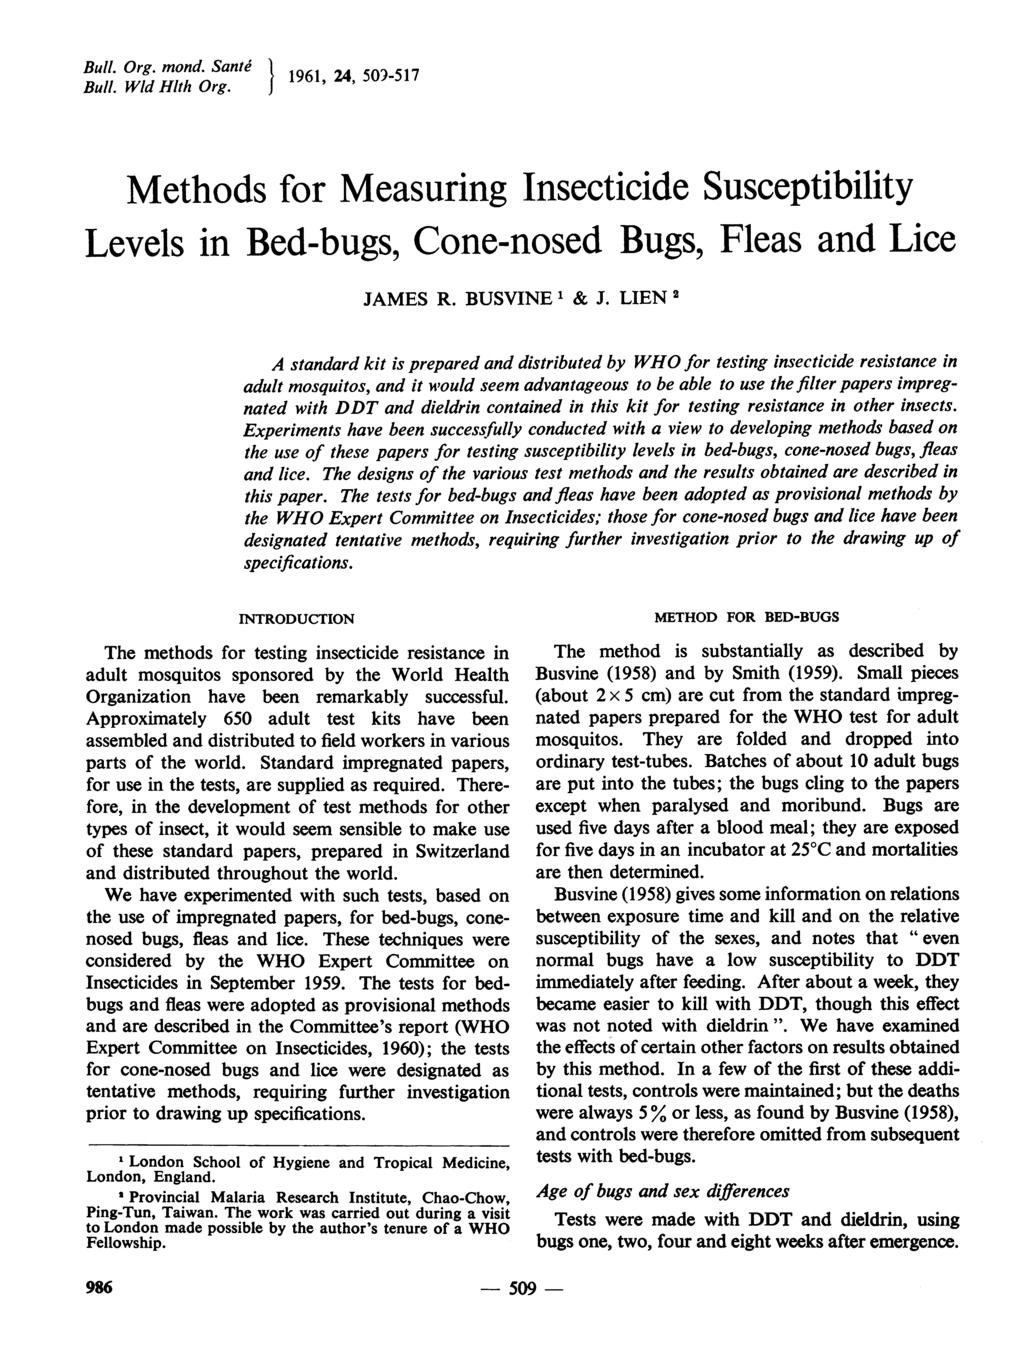 Bull. Org. mond. SanJe 1961, 24, 50)-517 Bull. Wld Hlth Org. Methods for Measuring Insecticide Susceptibility Levels in Bed-bugs, Cone-nosed Bugs, Fleas and Lice JAMES R. BUSVINE 1 & J.